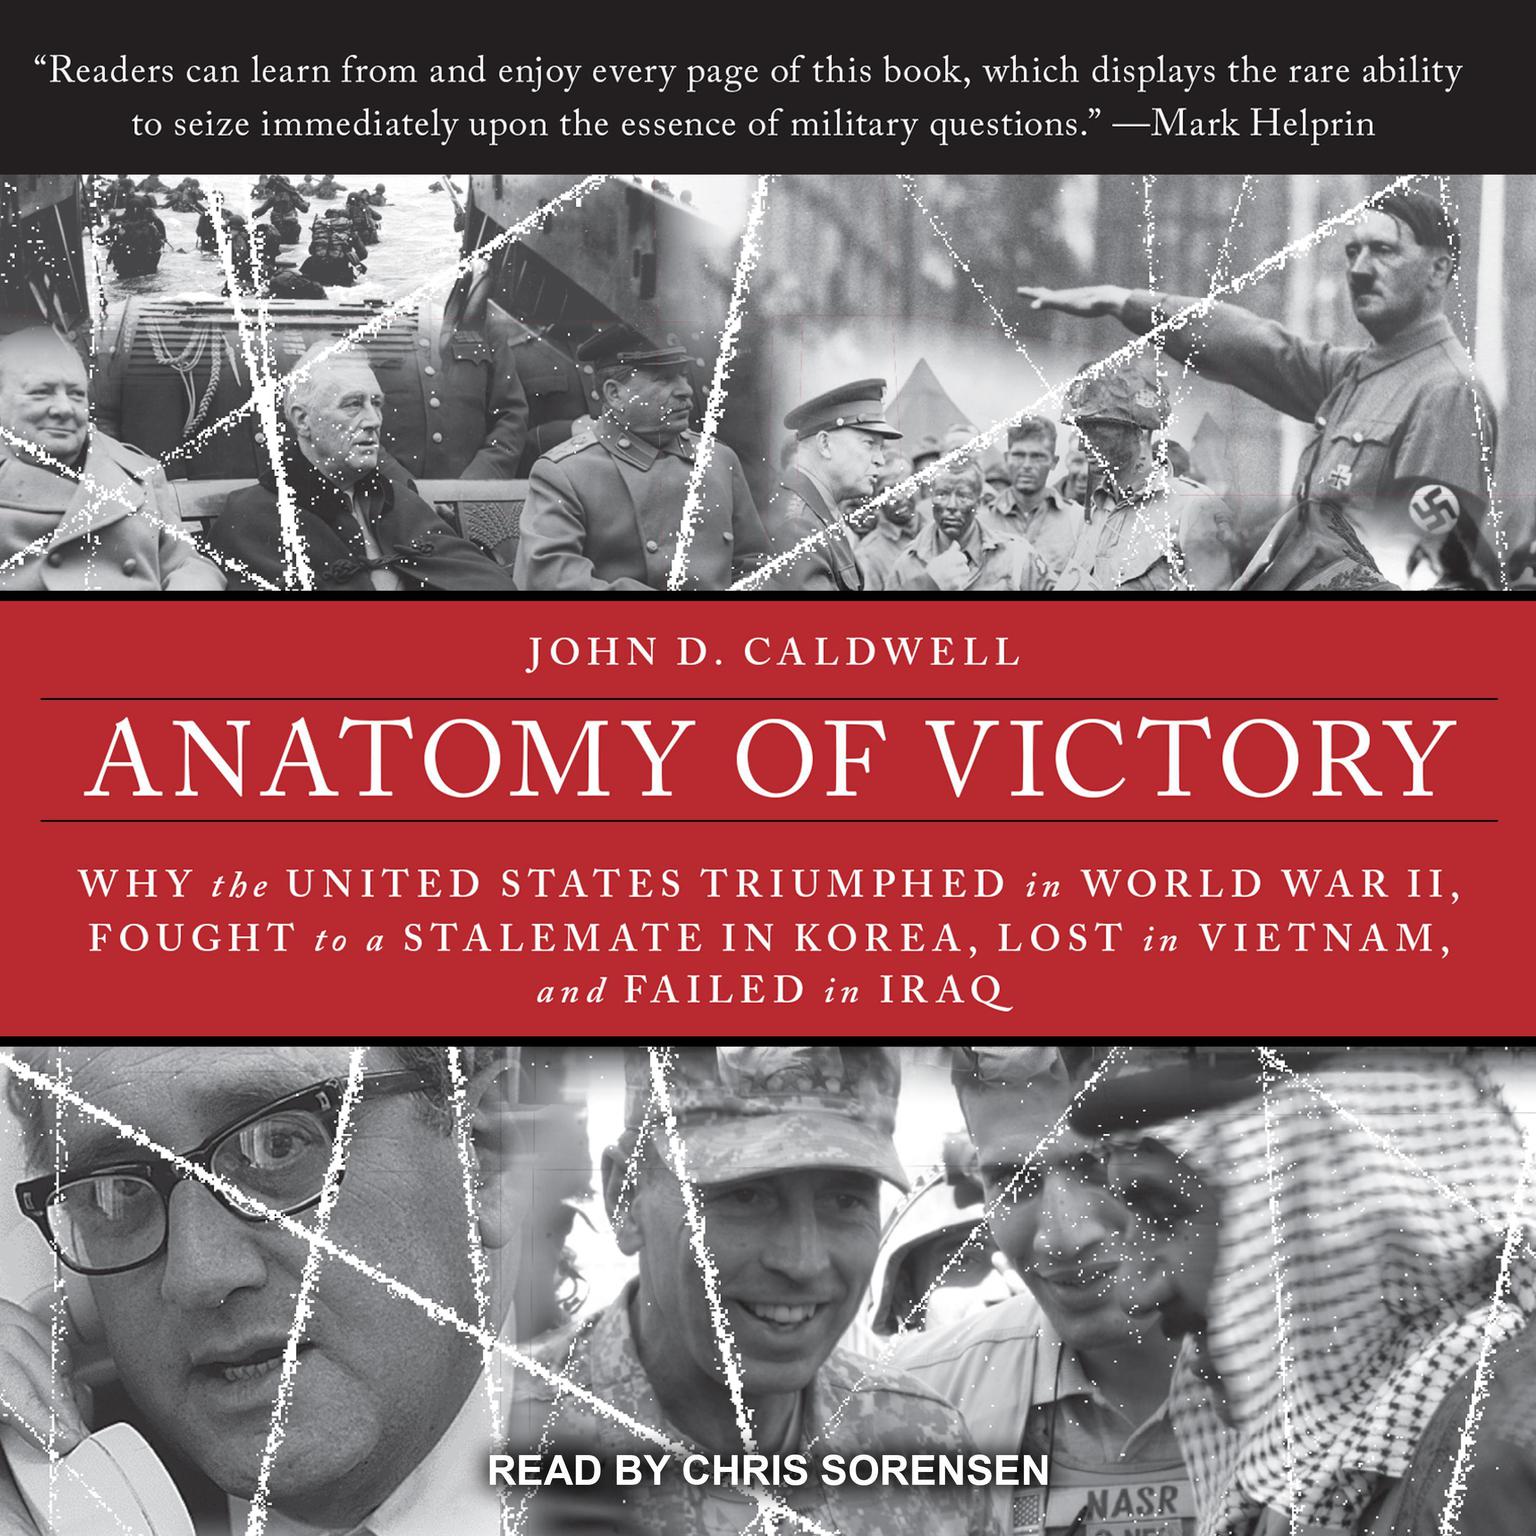 Anatomy of Victory: Why the United States Triumphed in World War II, Fought to a Stalemate in Korea, Lost in Vietnam, and Failed in Iraq Audiobook, by John D. Caldwell